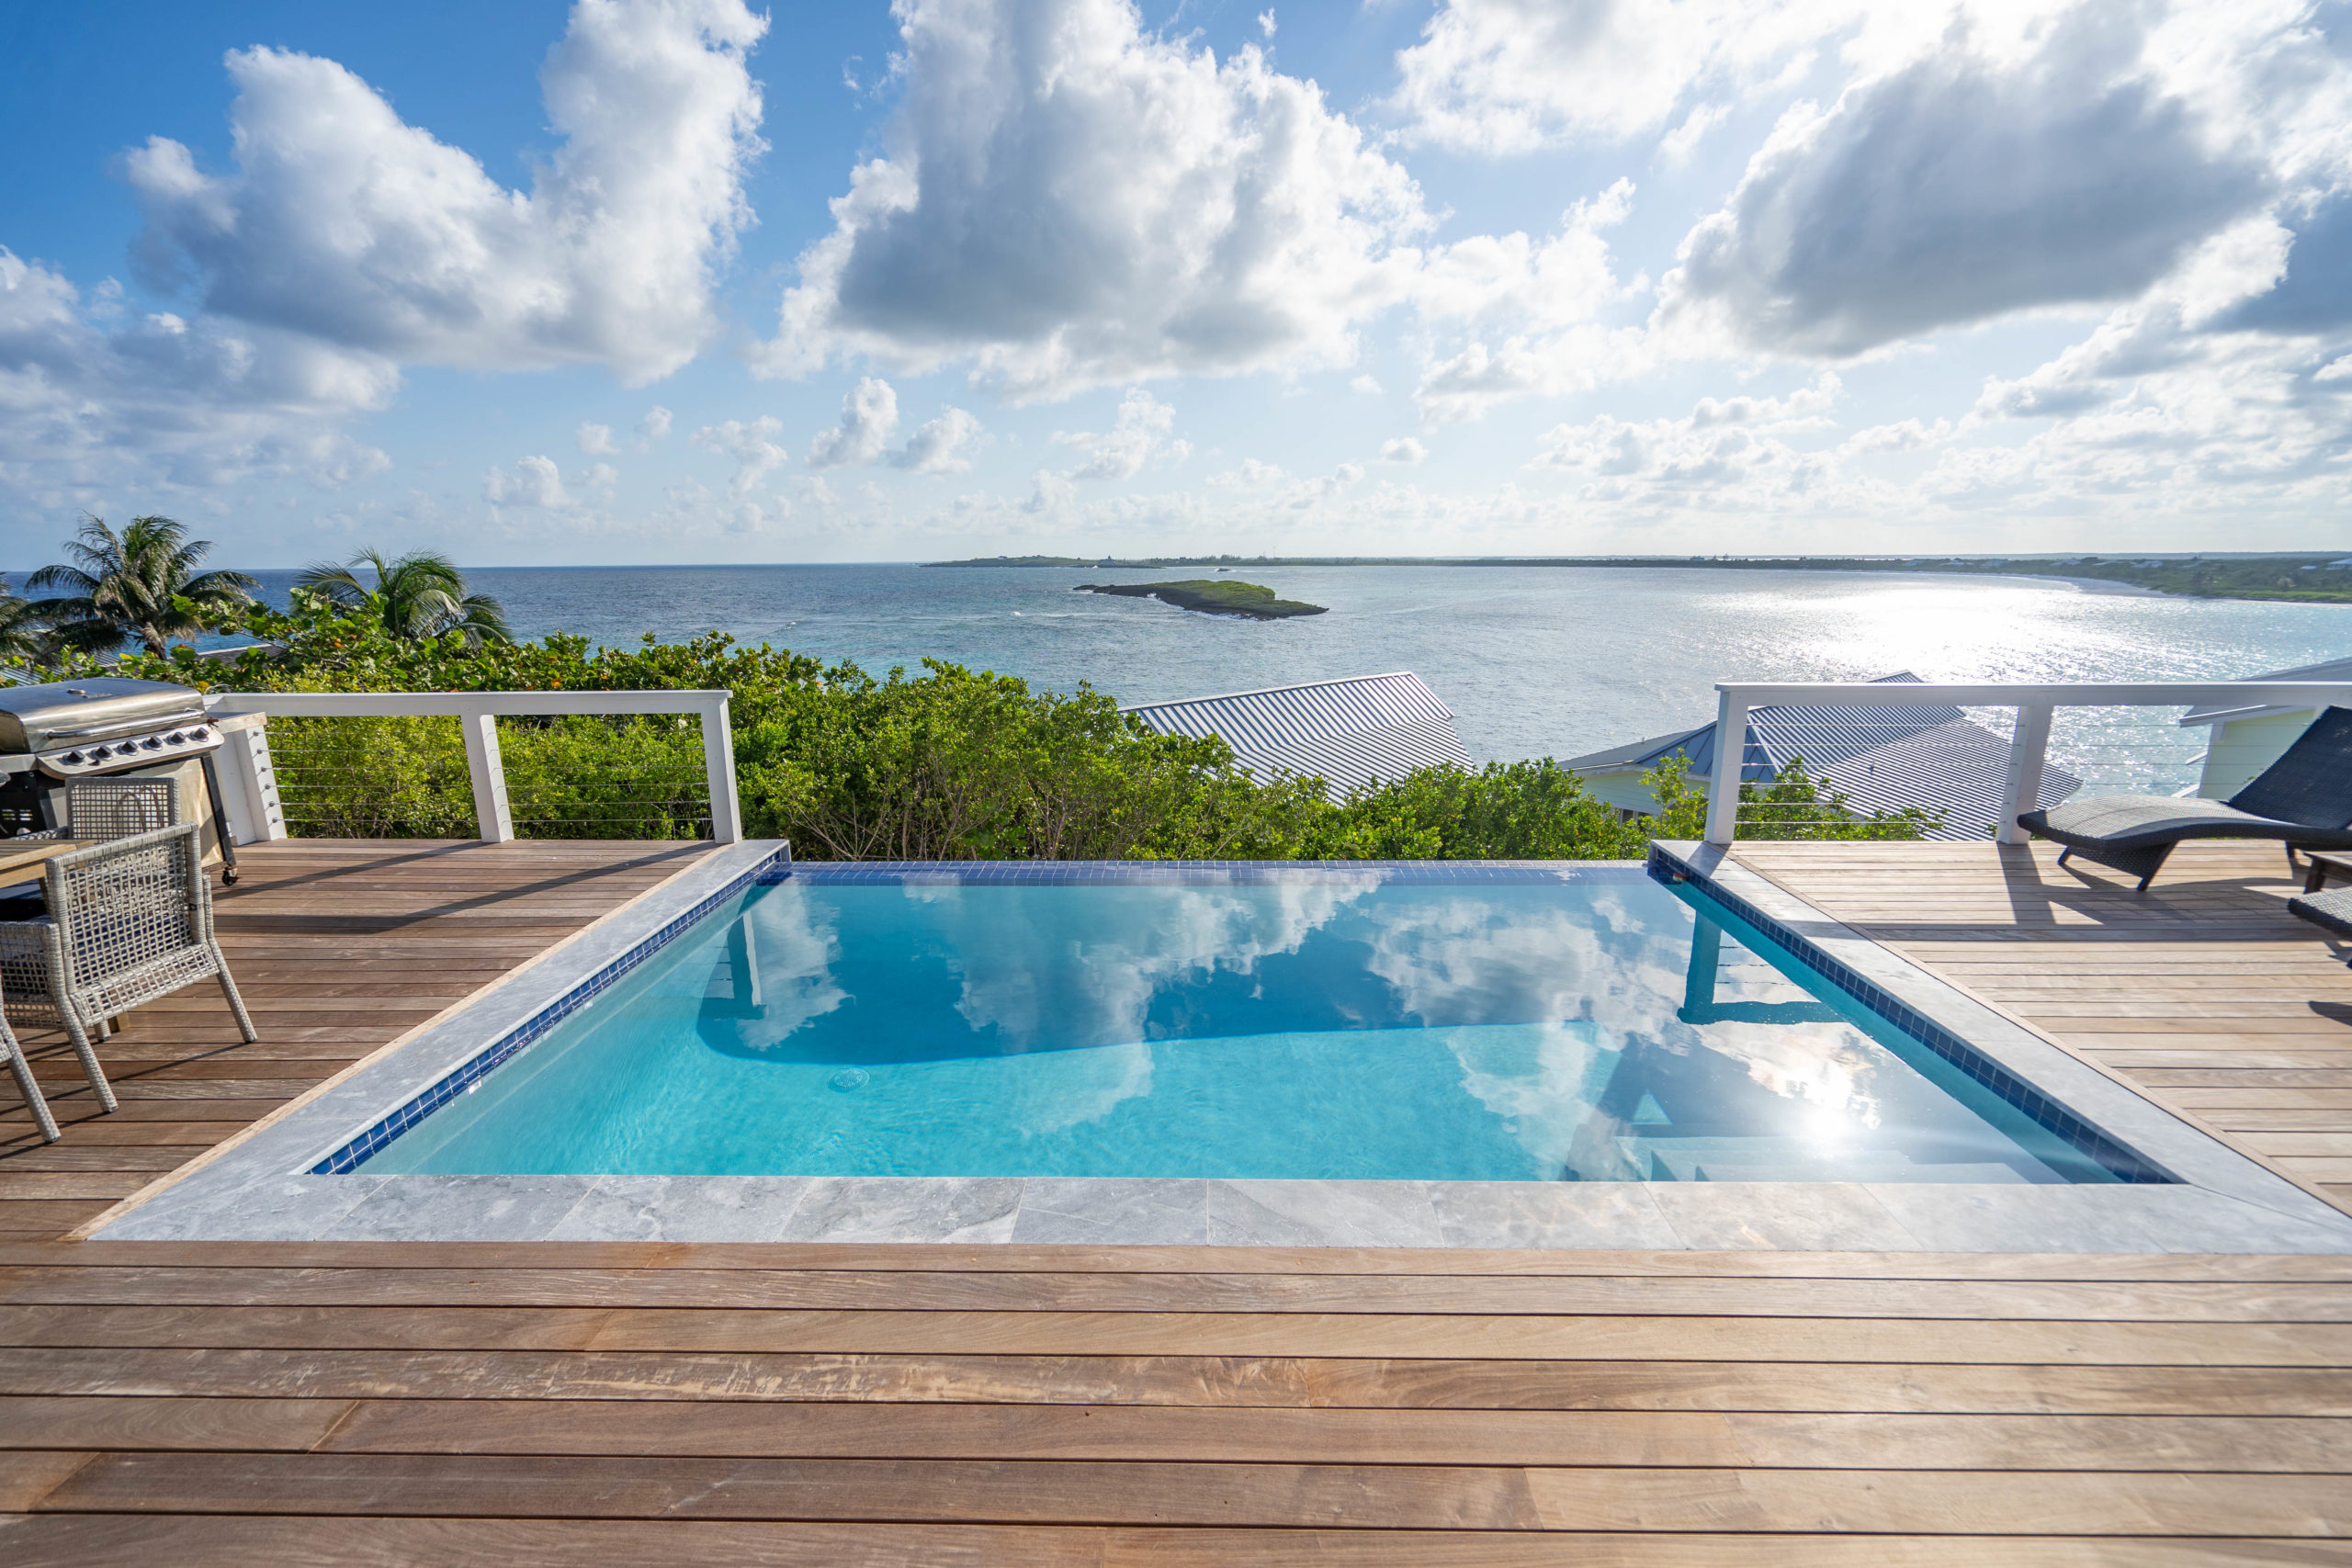 Infinity pool of a house located close to the Cliff House restaurant in The Bahamas